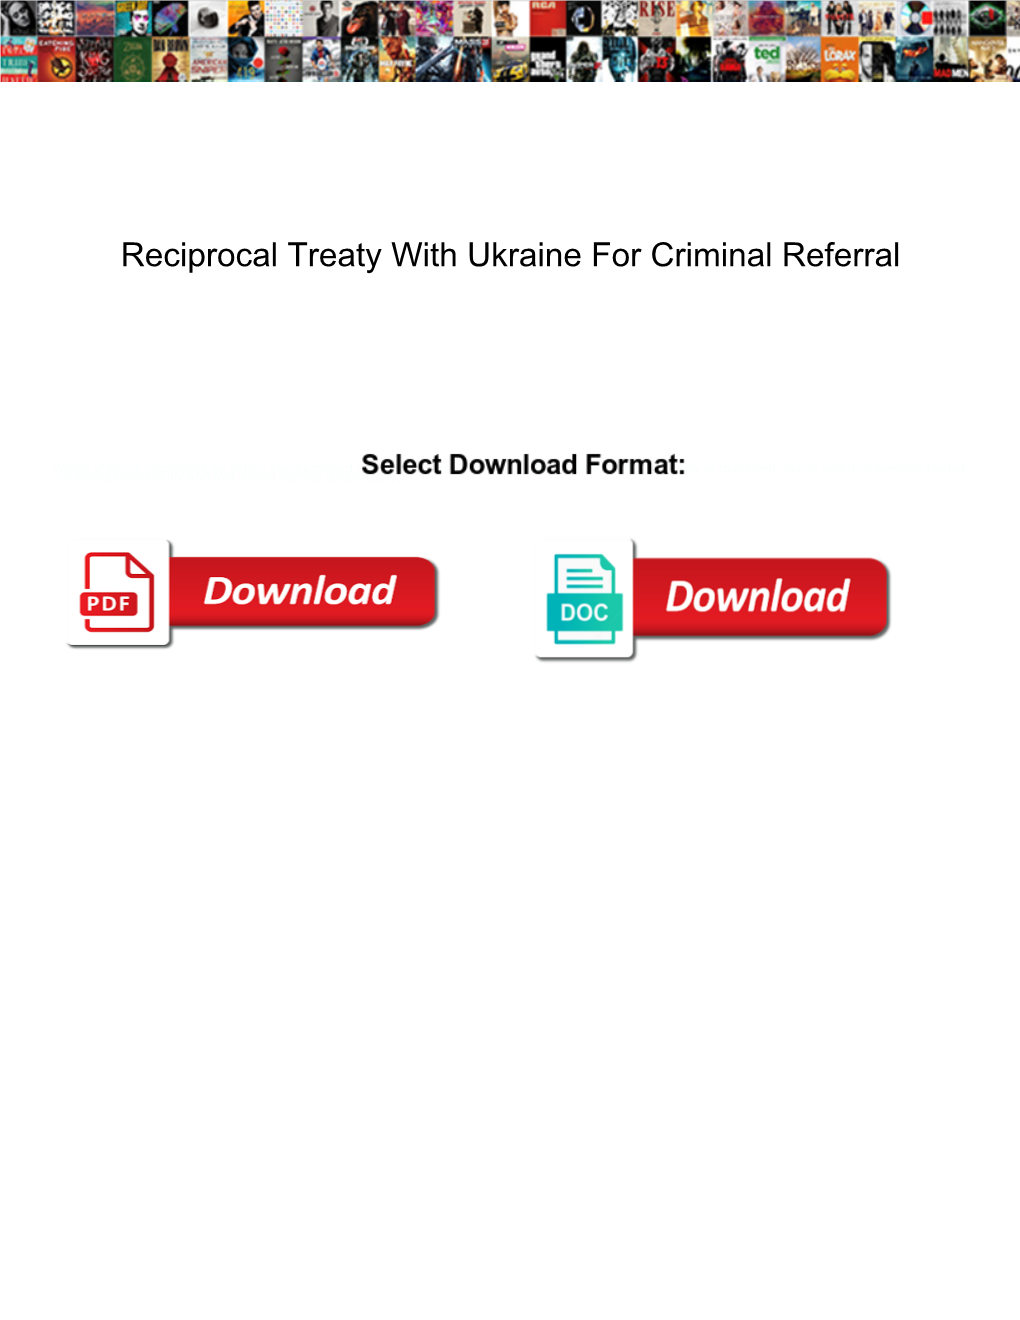 Reciprocal Treaty with Ukraine for Criminal Referral